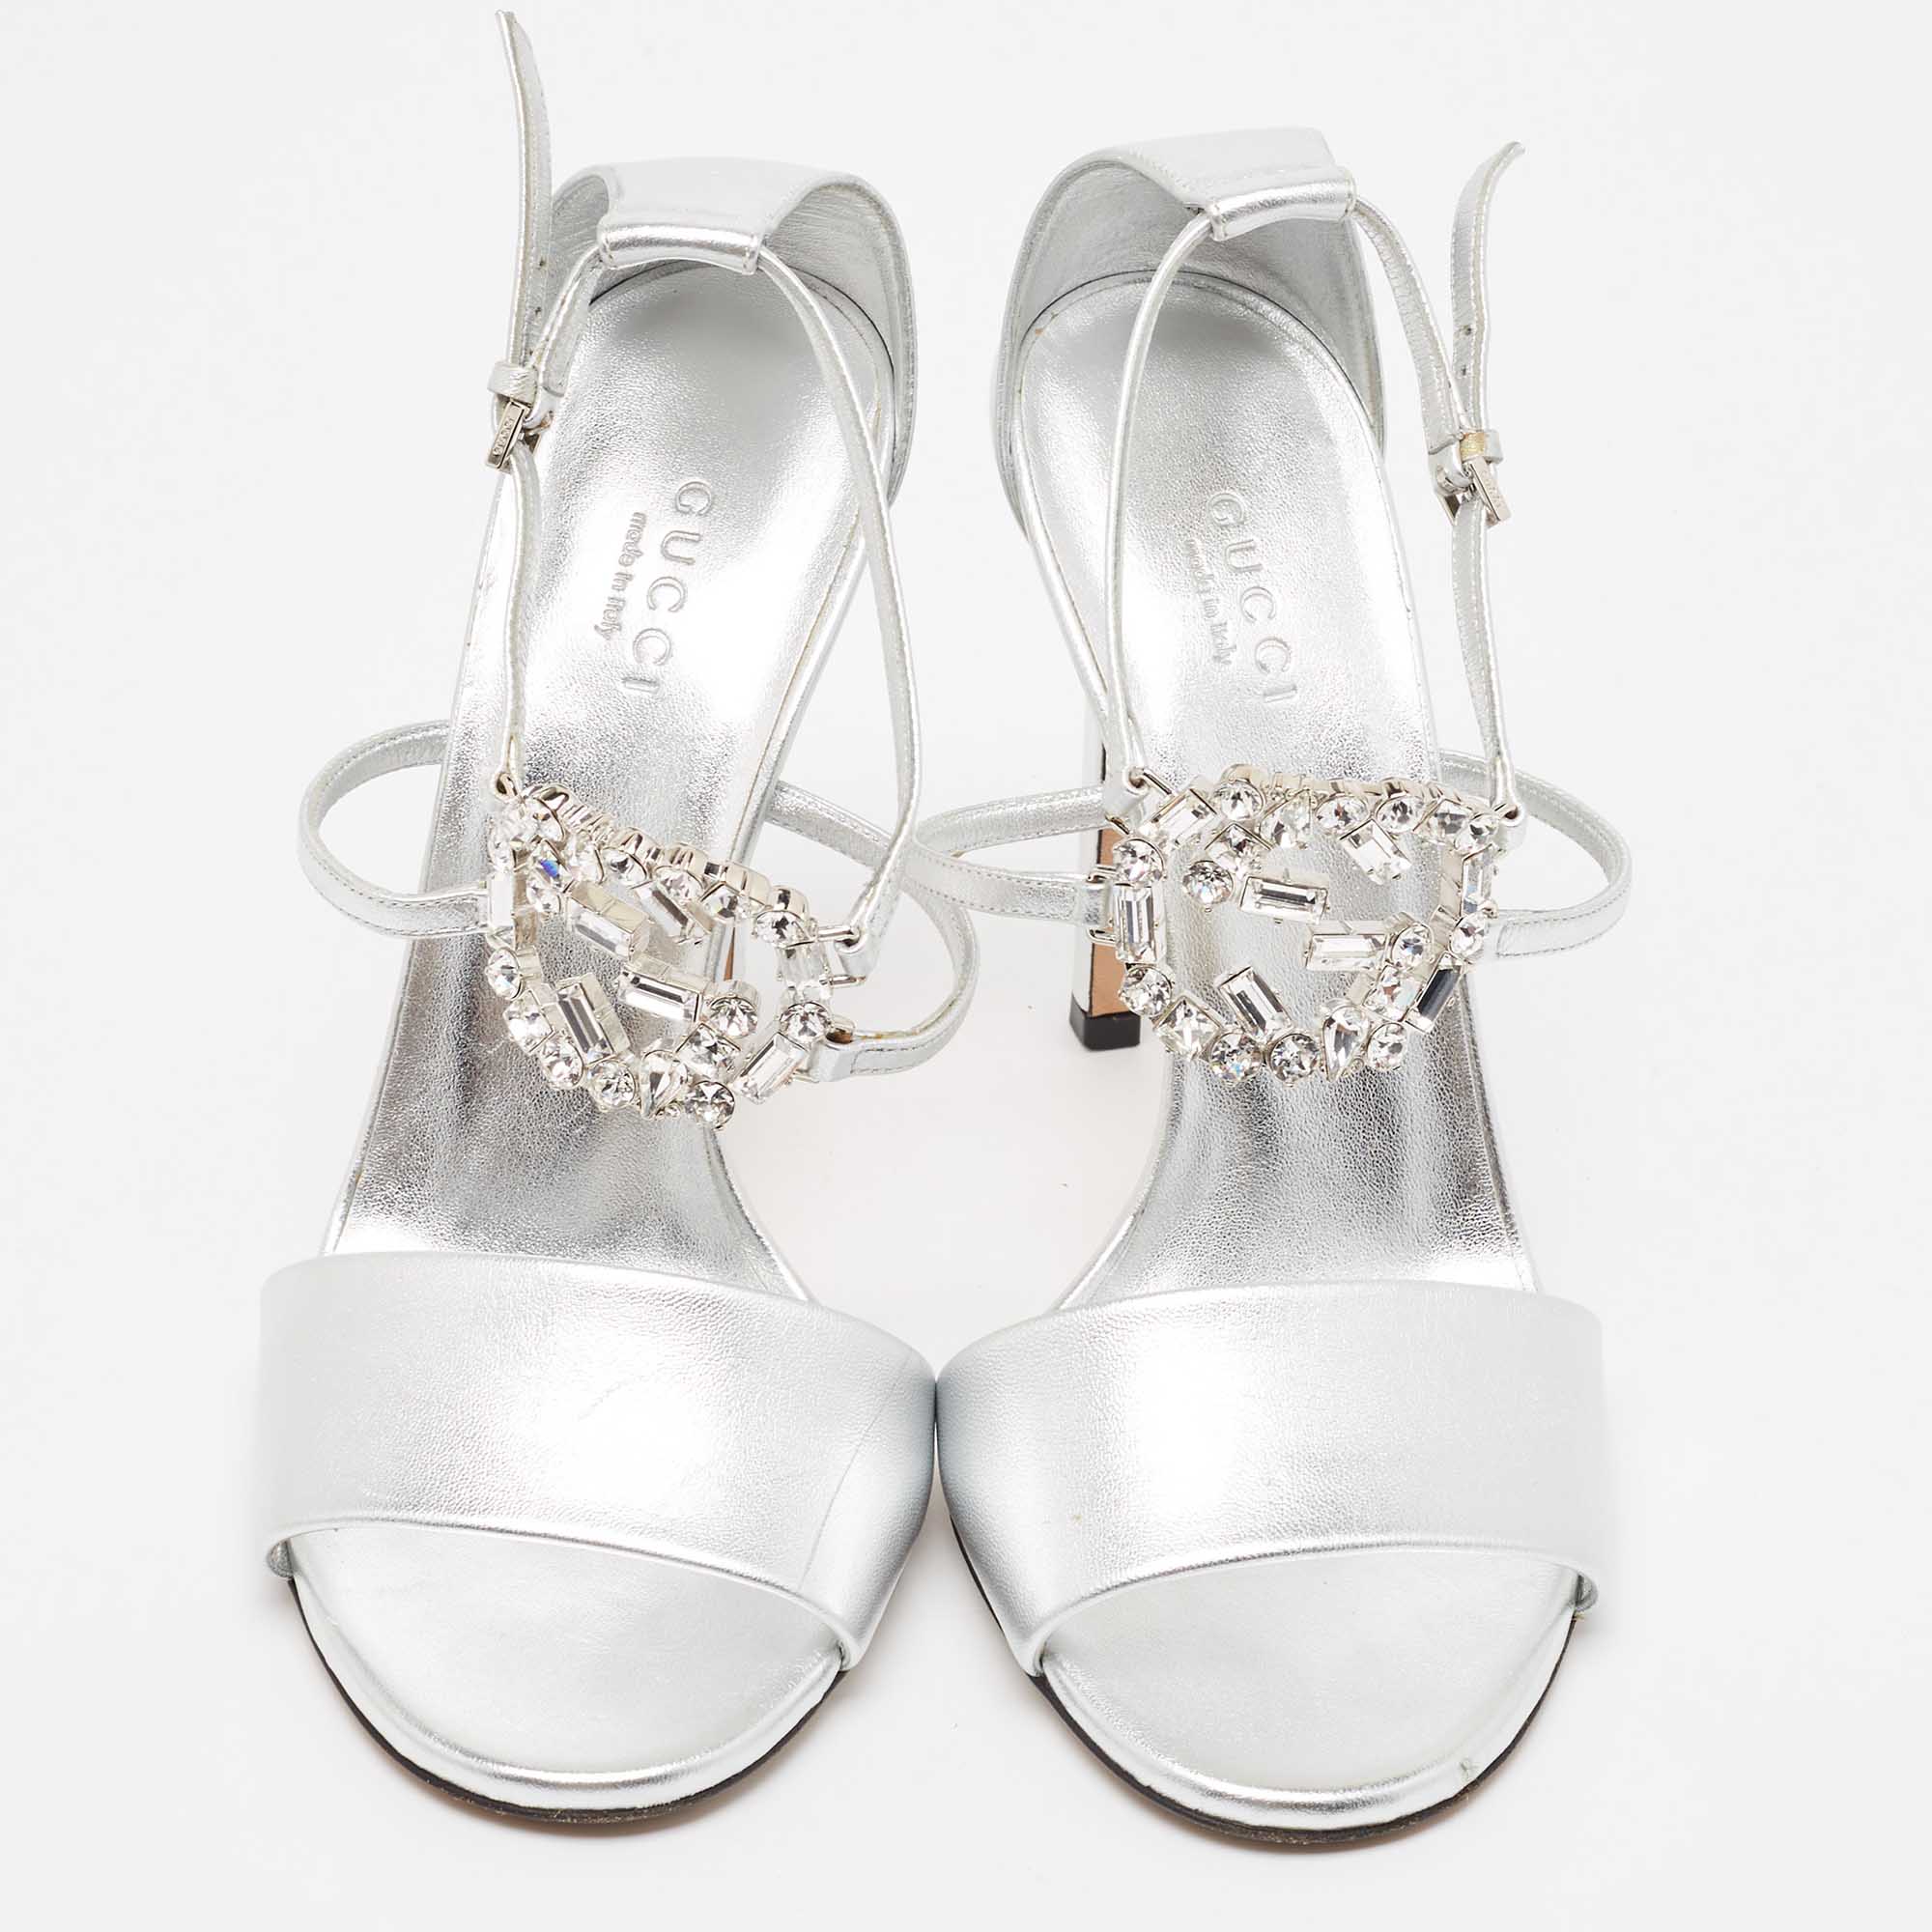 Gucci Silver Leather Crystal Embellished GG Logo Ankle Strap Sandals Size 37